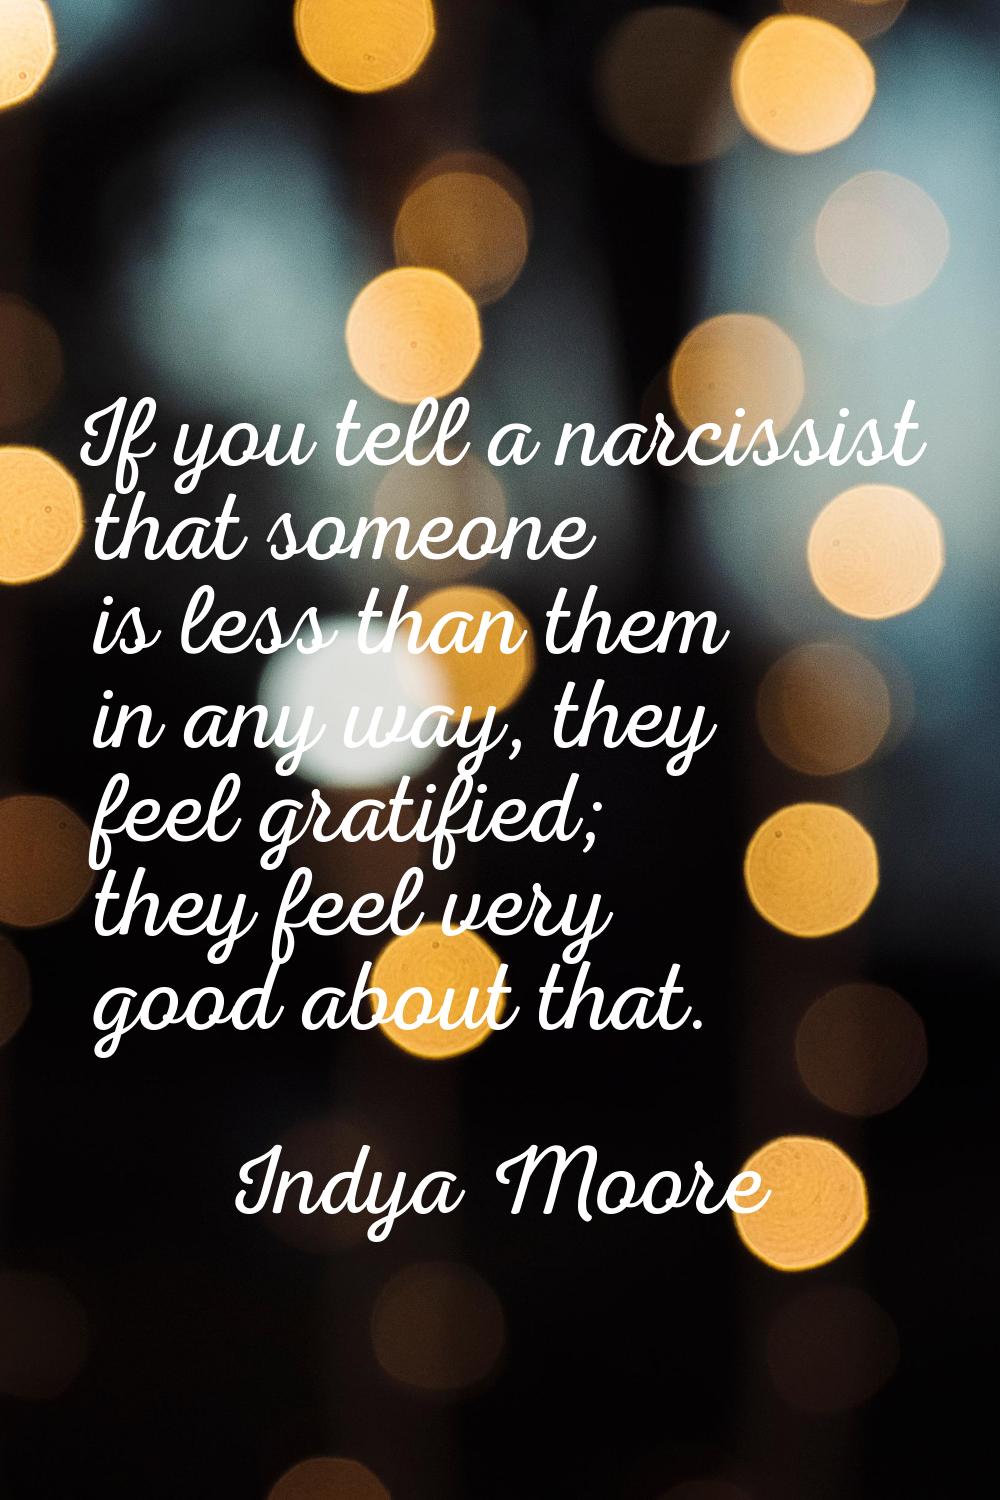 If you tell a narcissist that someone is less than them in any way, they feel gratified; they feel 